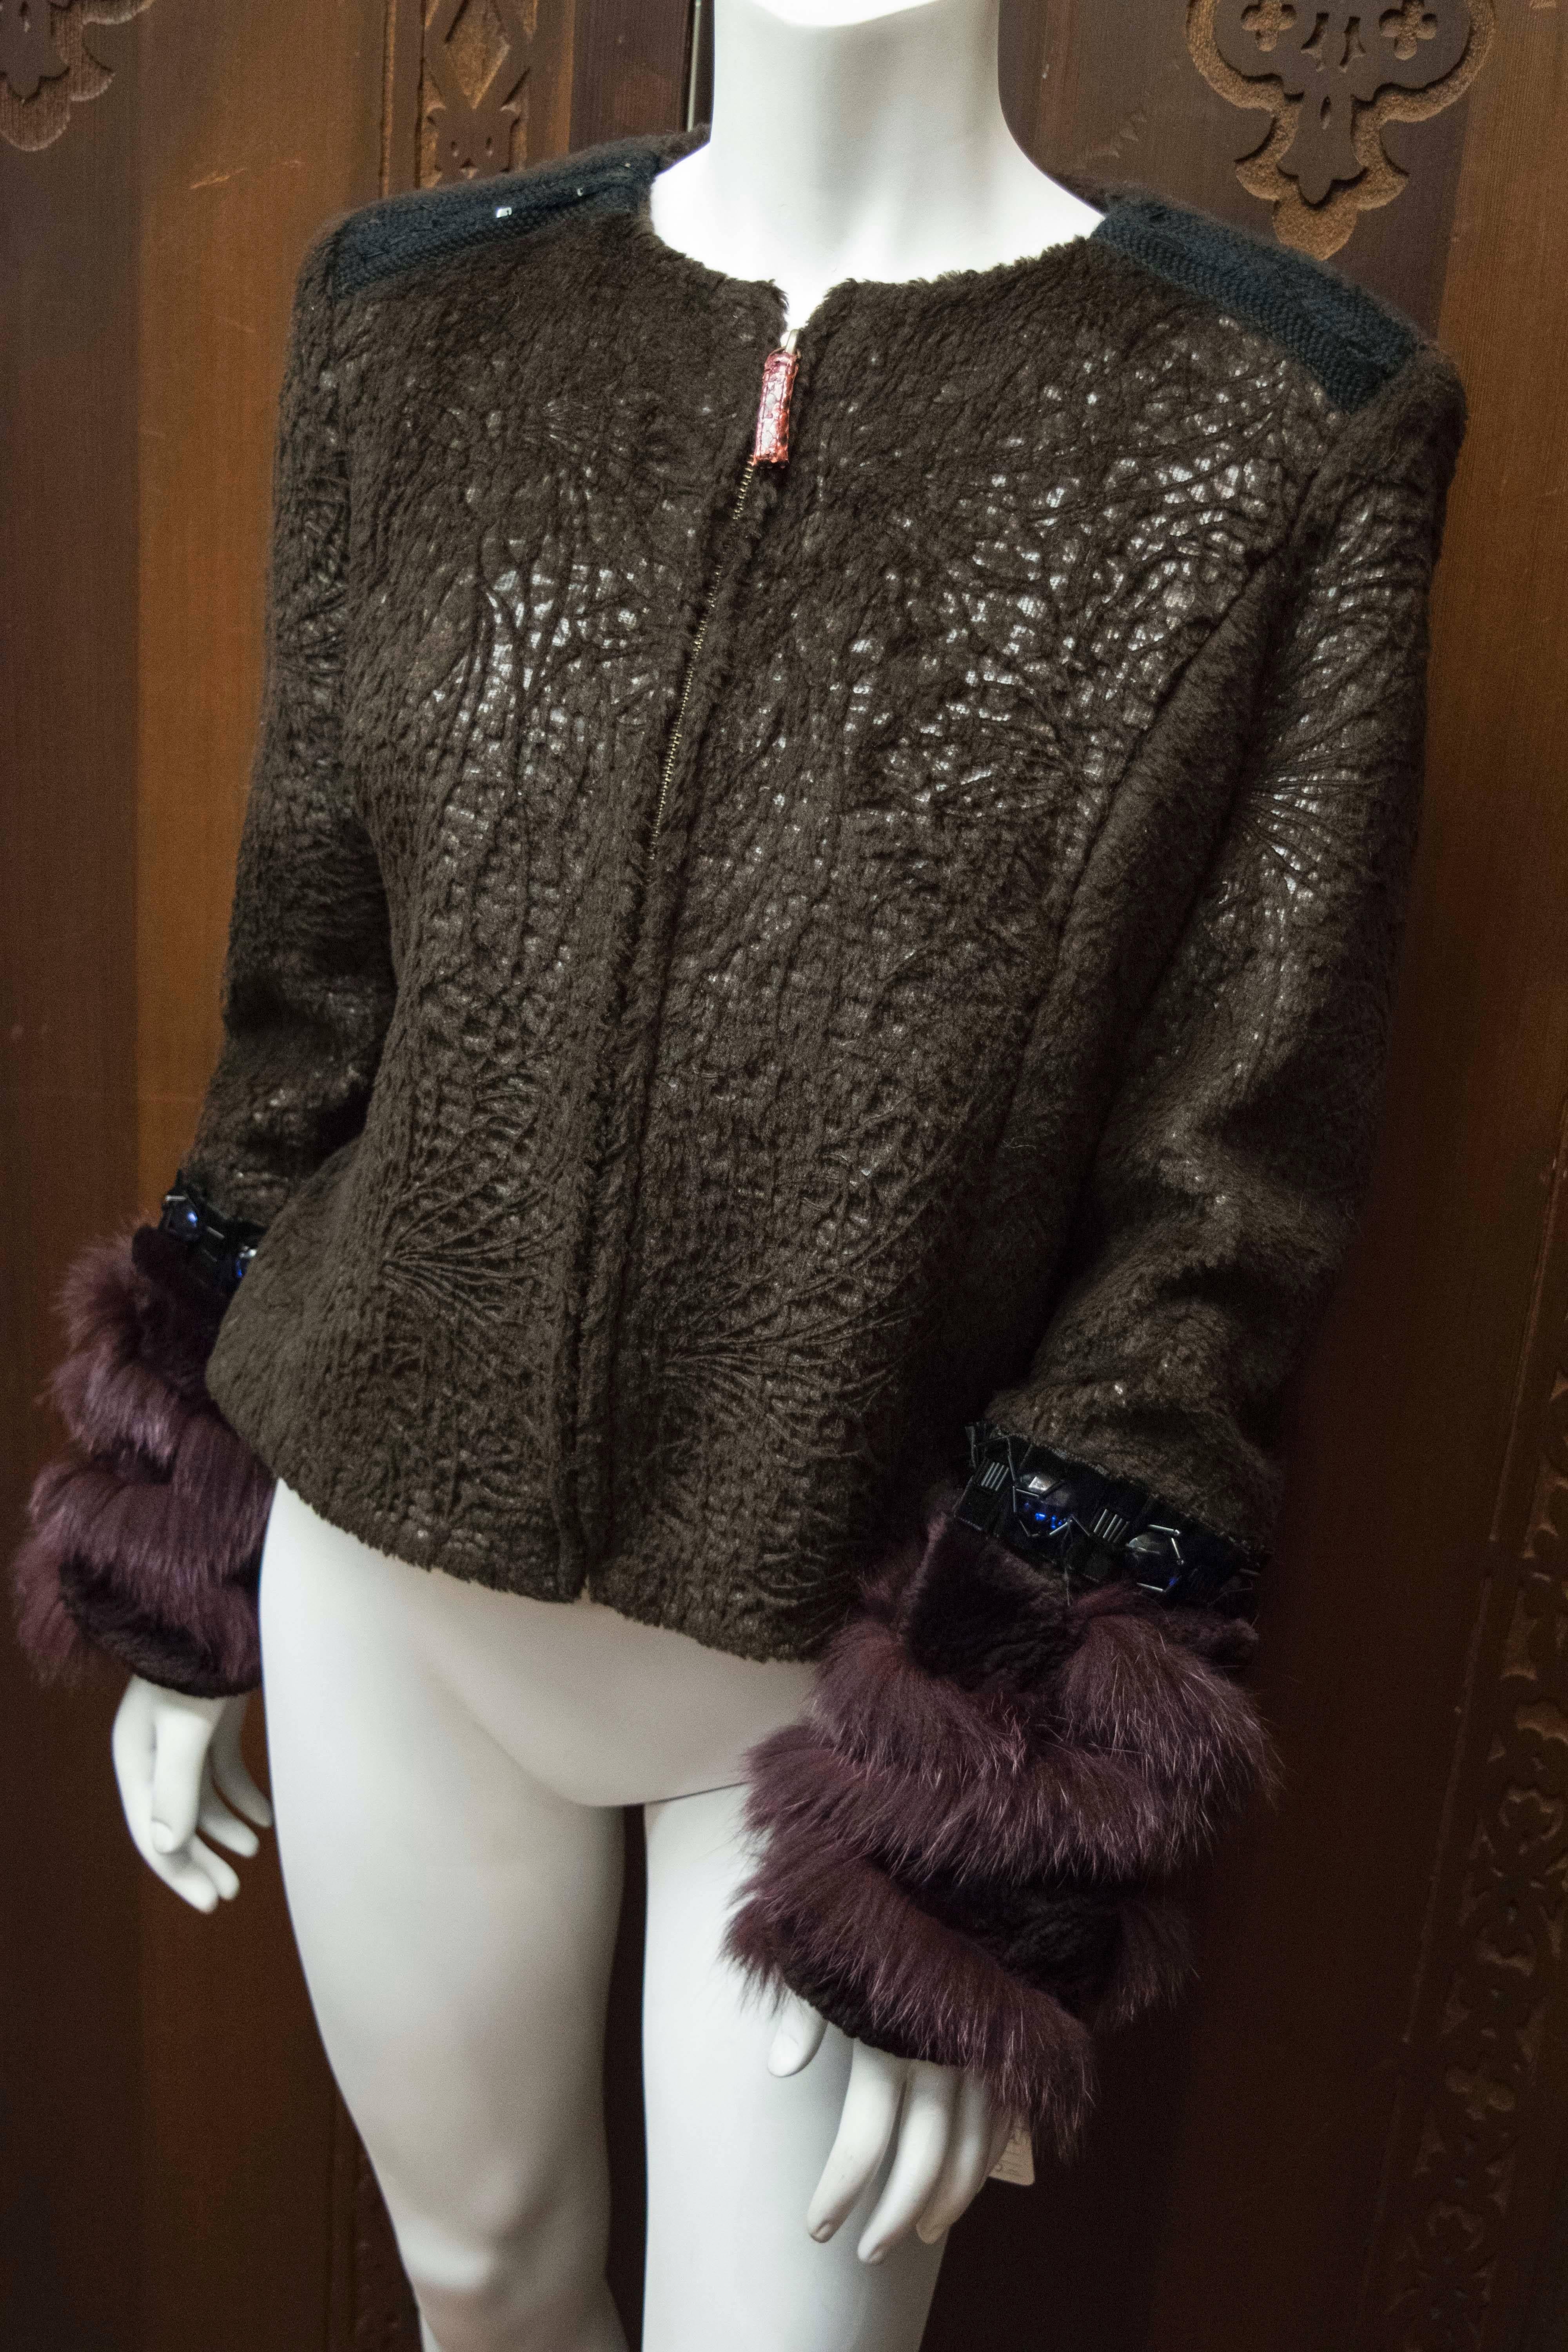 1990s Christian Lacroix Jacket With Fox Fur Trim

An interesting piece designed by Lacroix in the '90s, the jacket boast dyed Fox and sheered Beaver sleeve details as well as bejewelled epaulettes.

Size 42

B 40
W 34
H 36
L 22